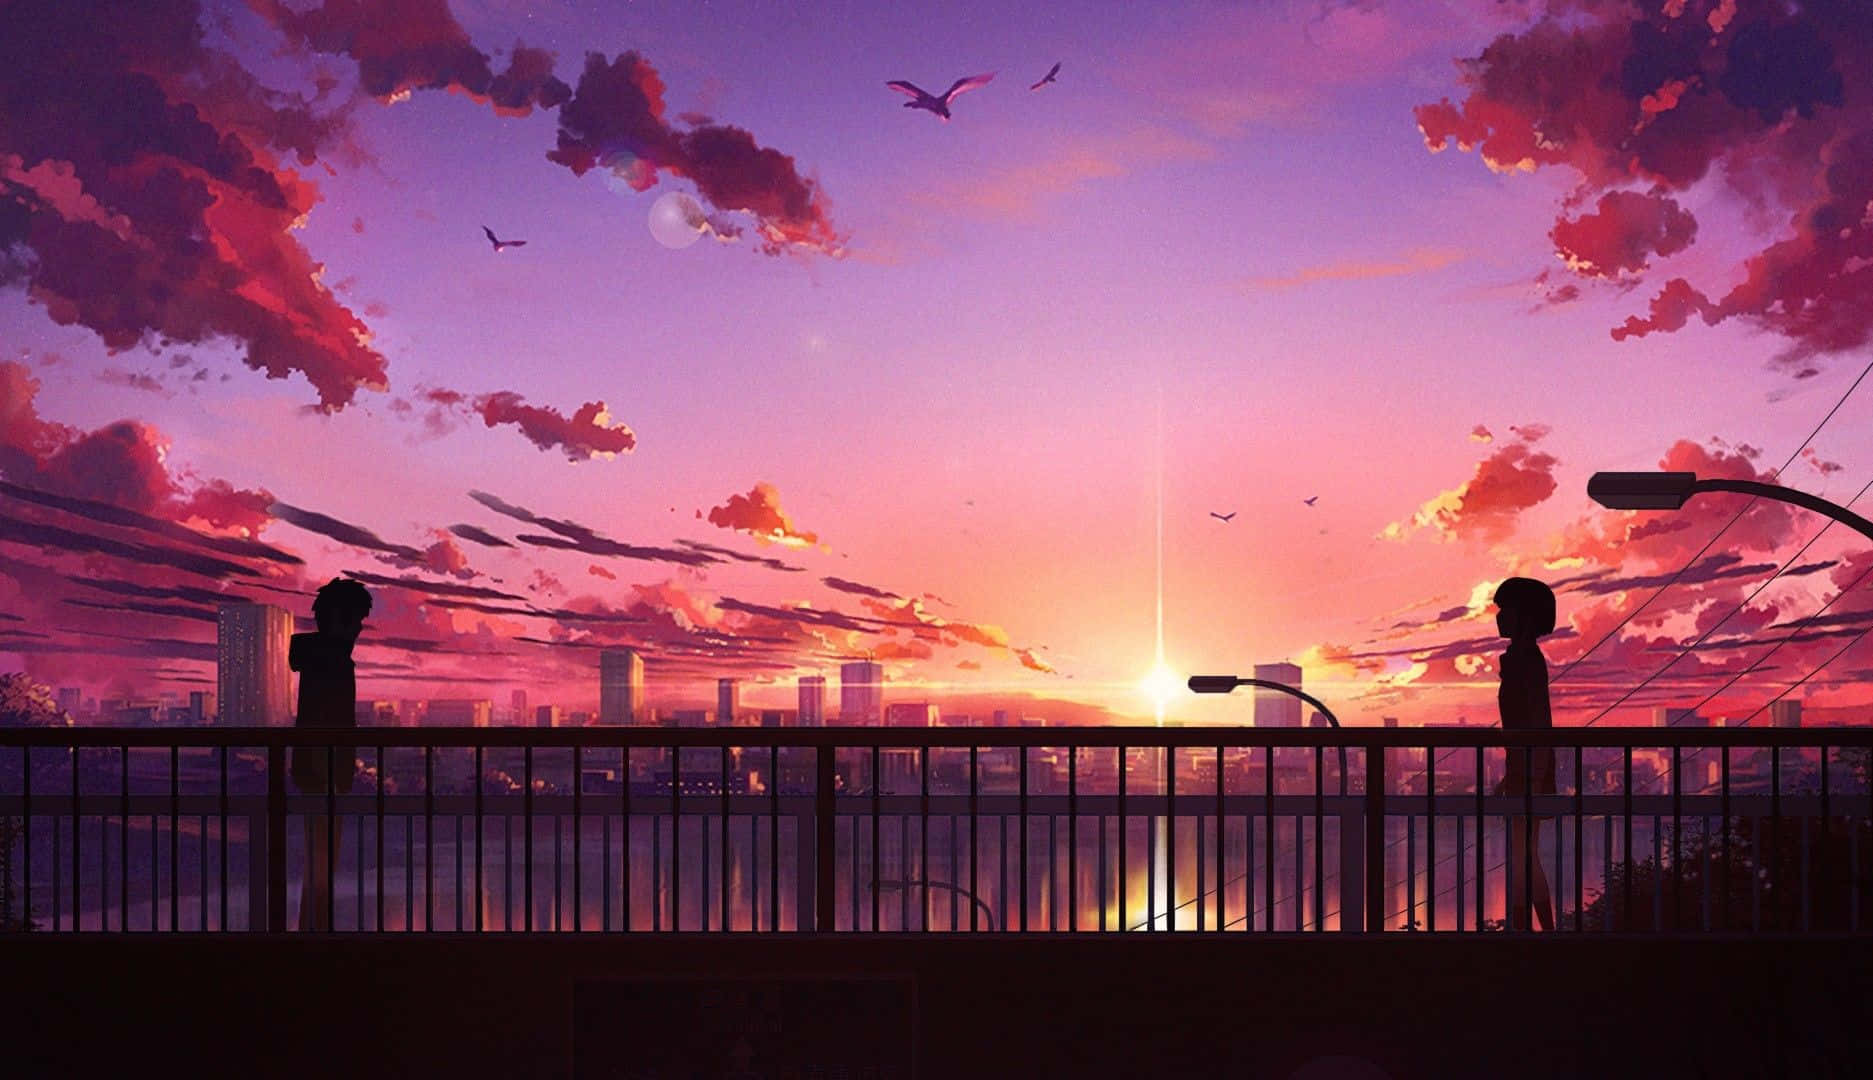 Immersed In The Beauty Of Nature, A Silhouette Of A Young Girl Sits And Admires The Stunning Anime Sunset. Wallpaper